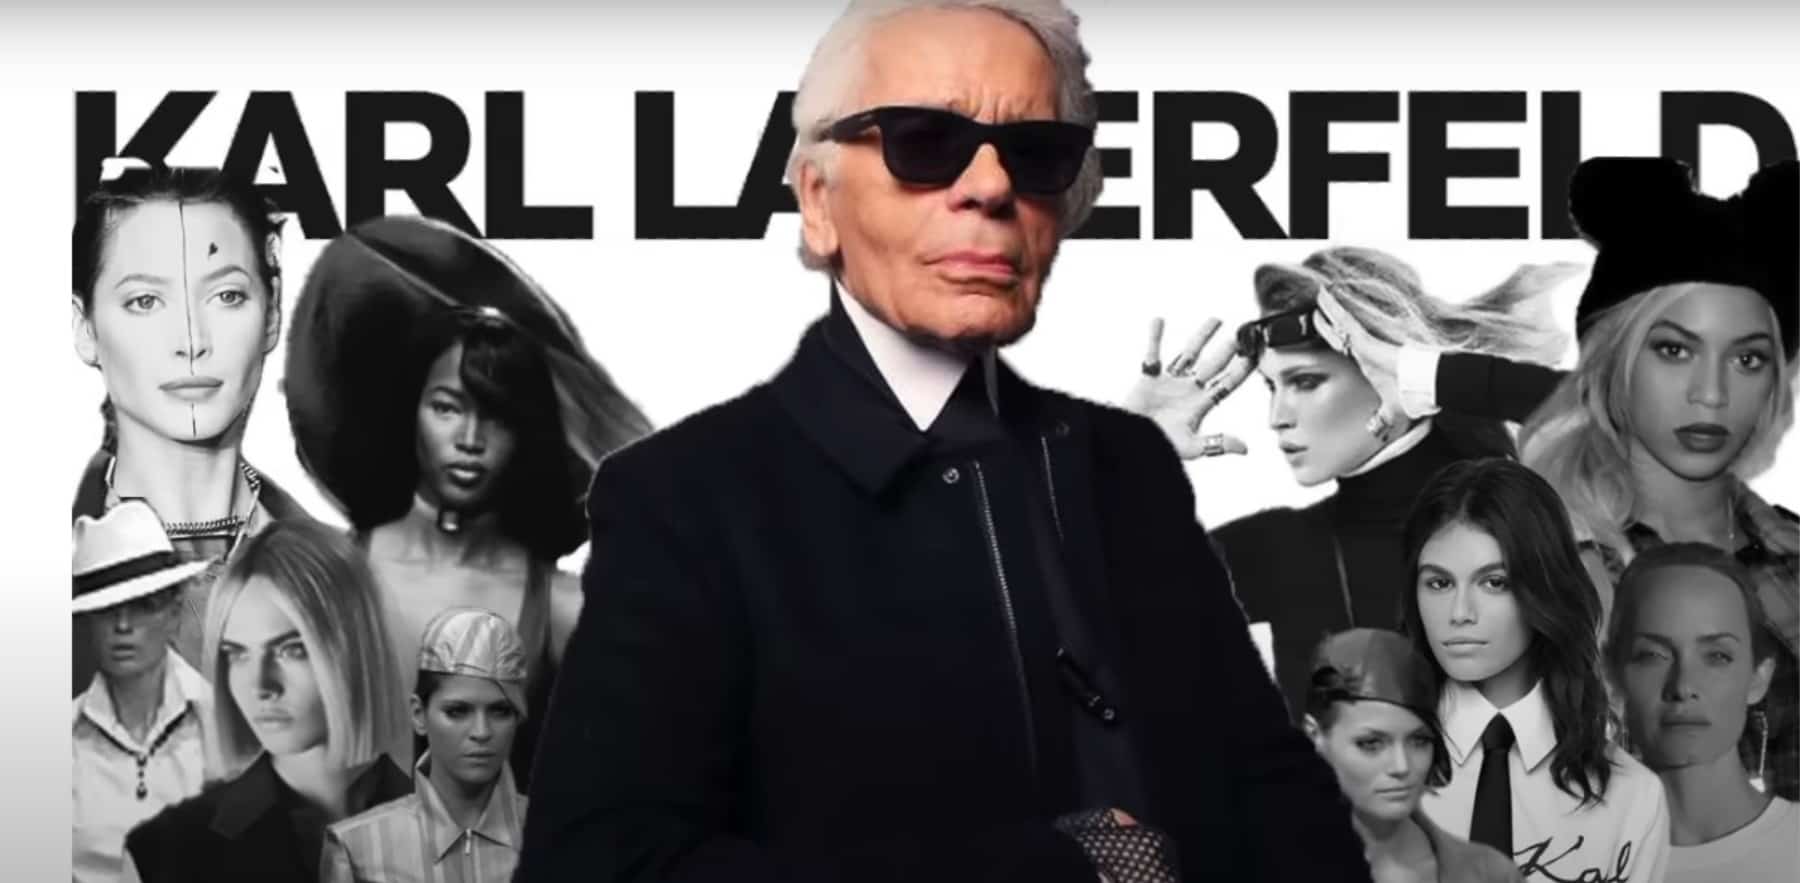 The Met Gala Theme Controversy Explained: Karl Lagerfeld Did Nothing ...